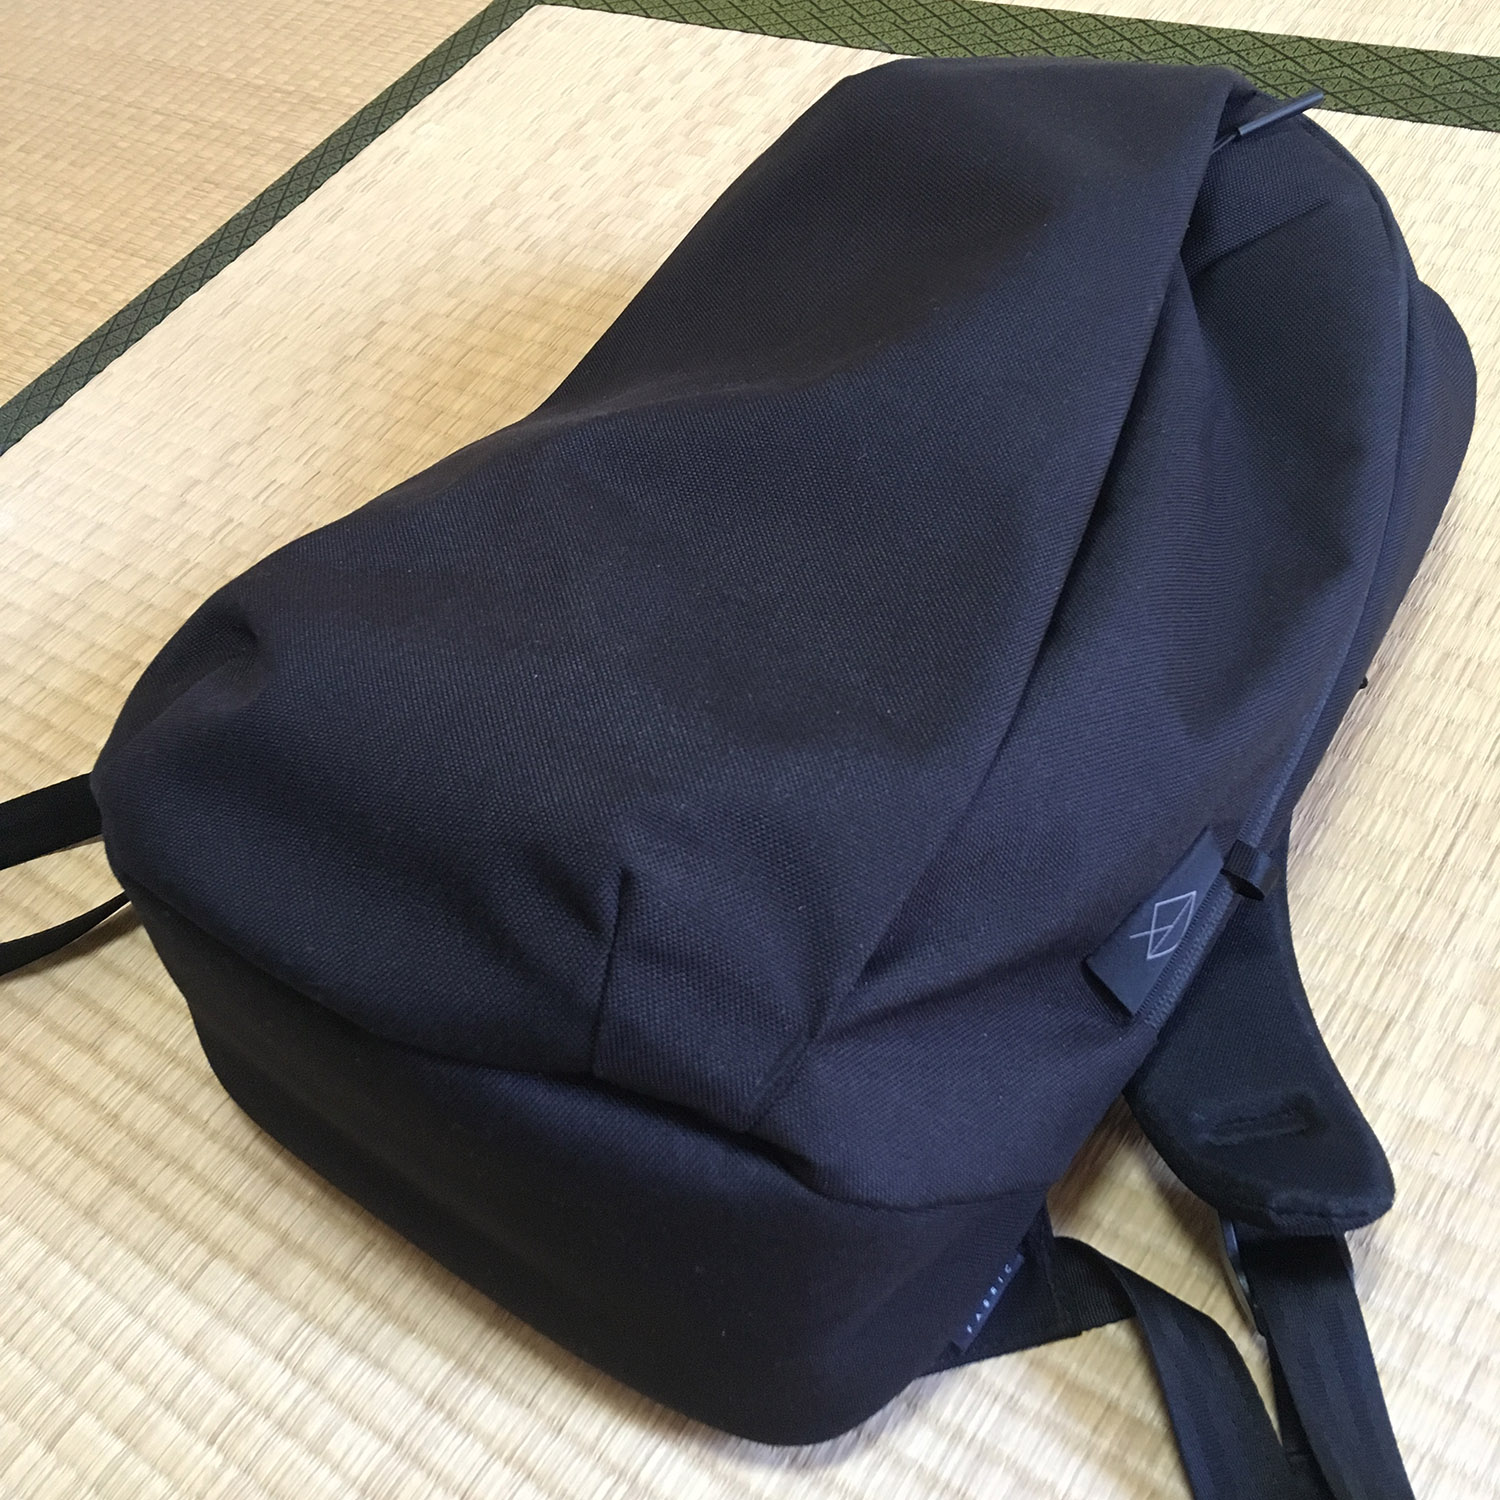 WEXLEY STEM BACKPACK を購入した！【レビュー】 | PING SONG YOU